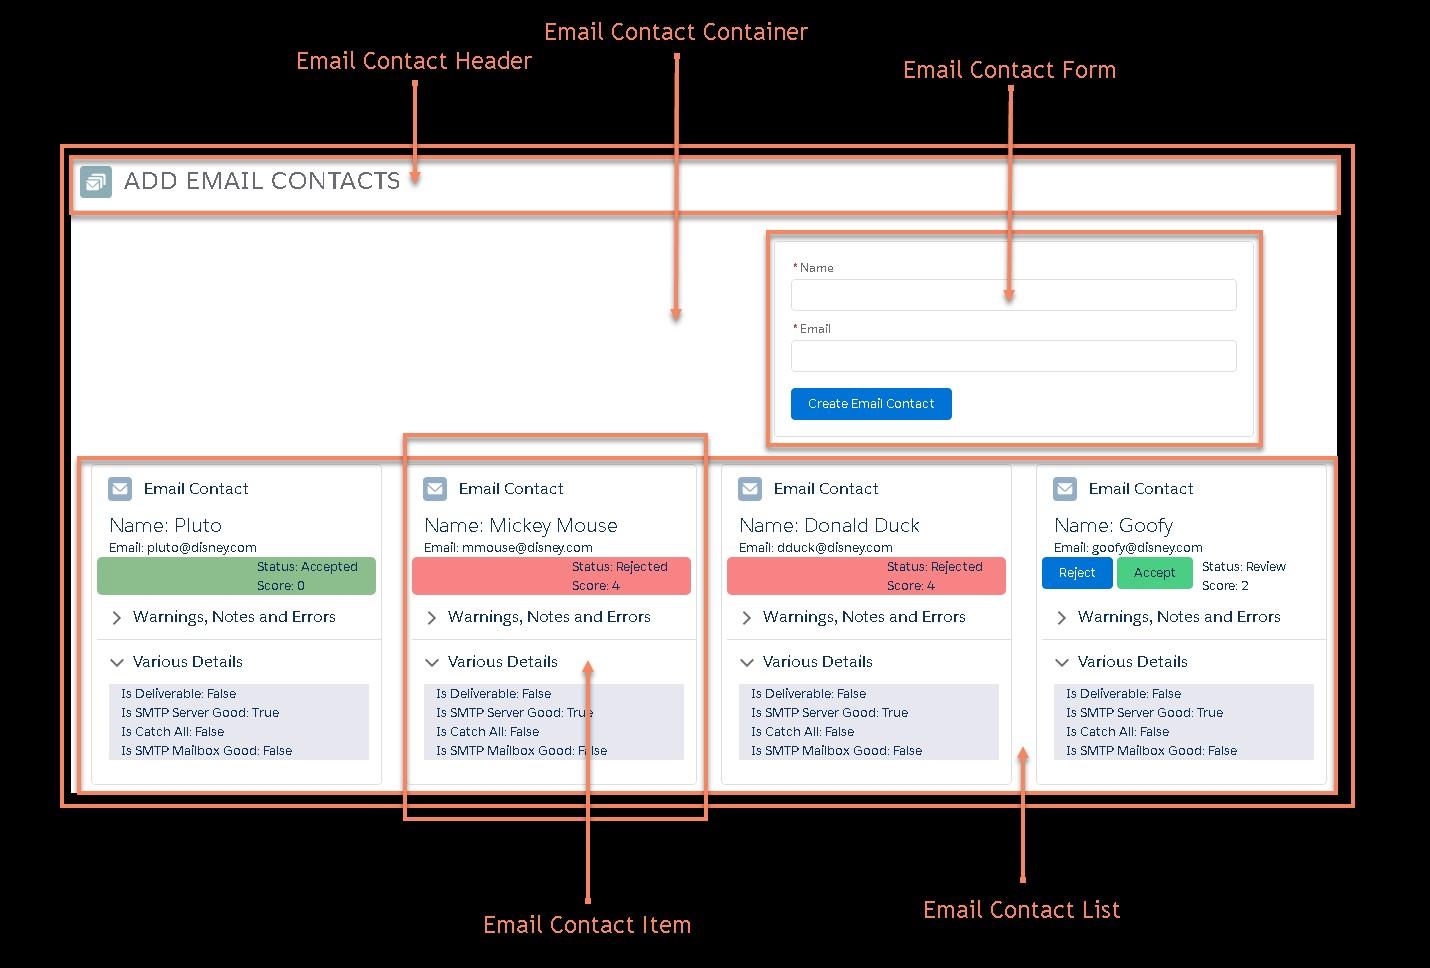 Service Objects Salesforce Integration can help improve your contact data quality, help with data validation, and enhance your business operations.